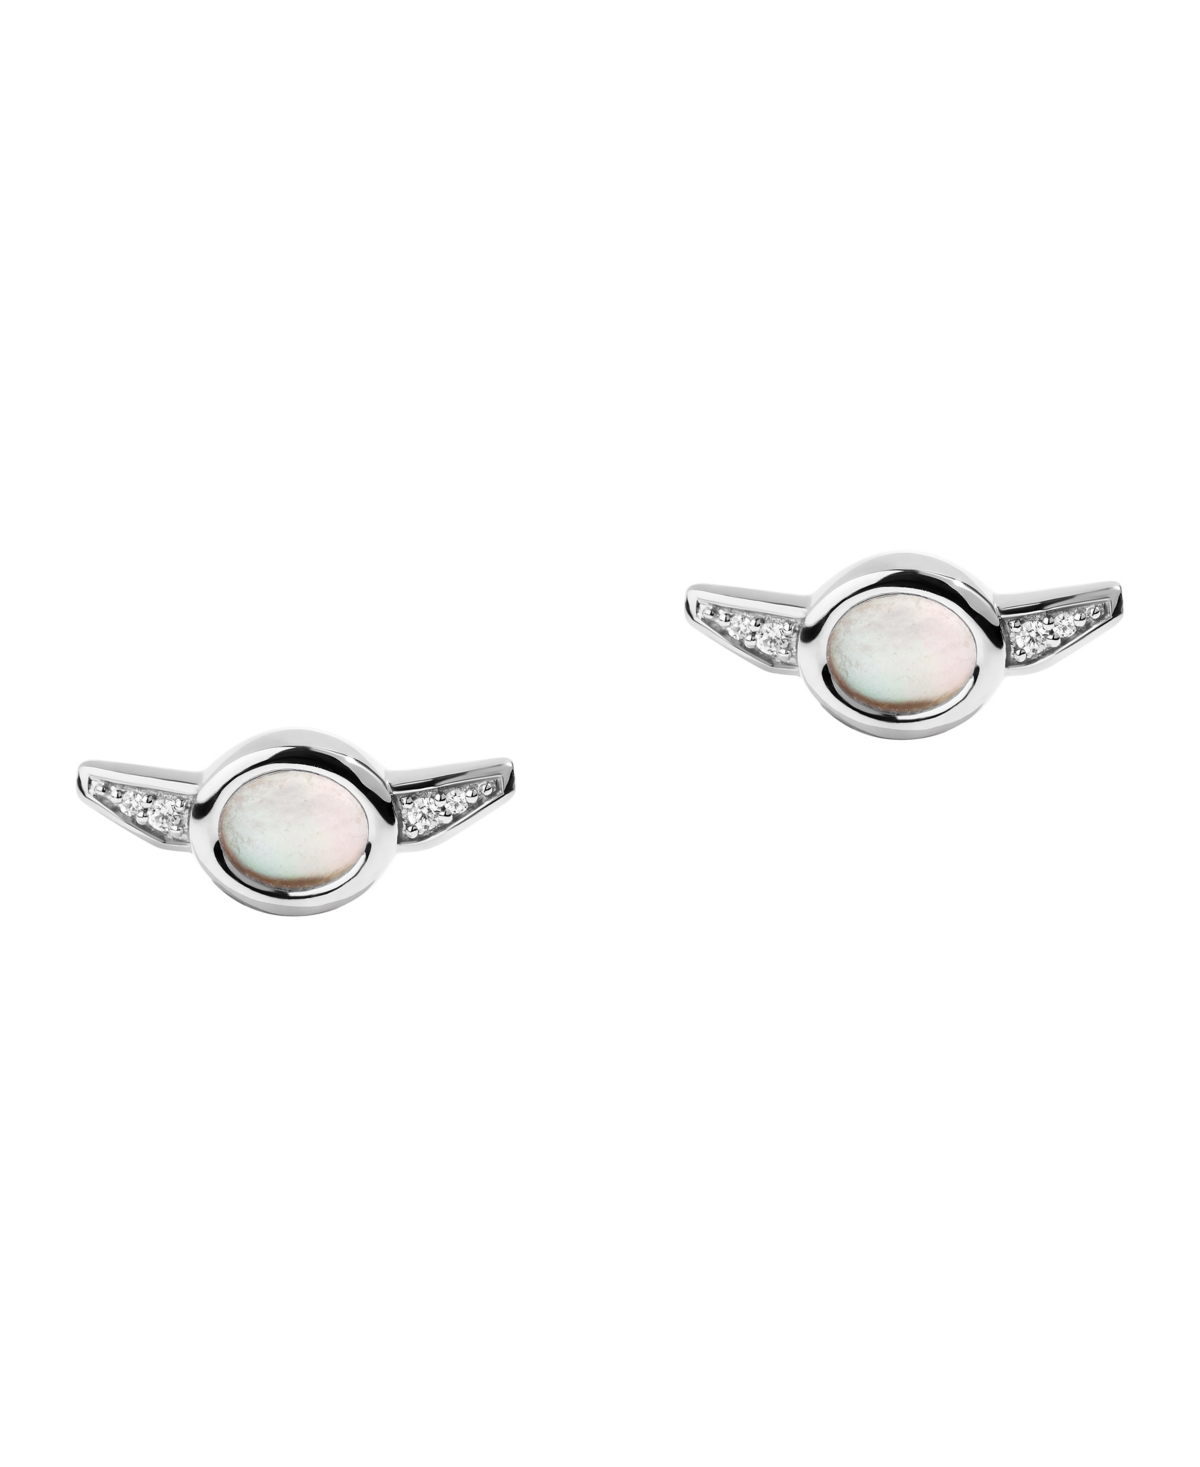 Grogua Diamond Accent and Mother of Pearl Earrings (1/20 ct. t.w.) in Sterling Silver - Sterling Silver